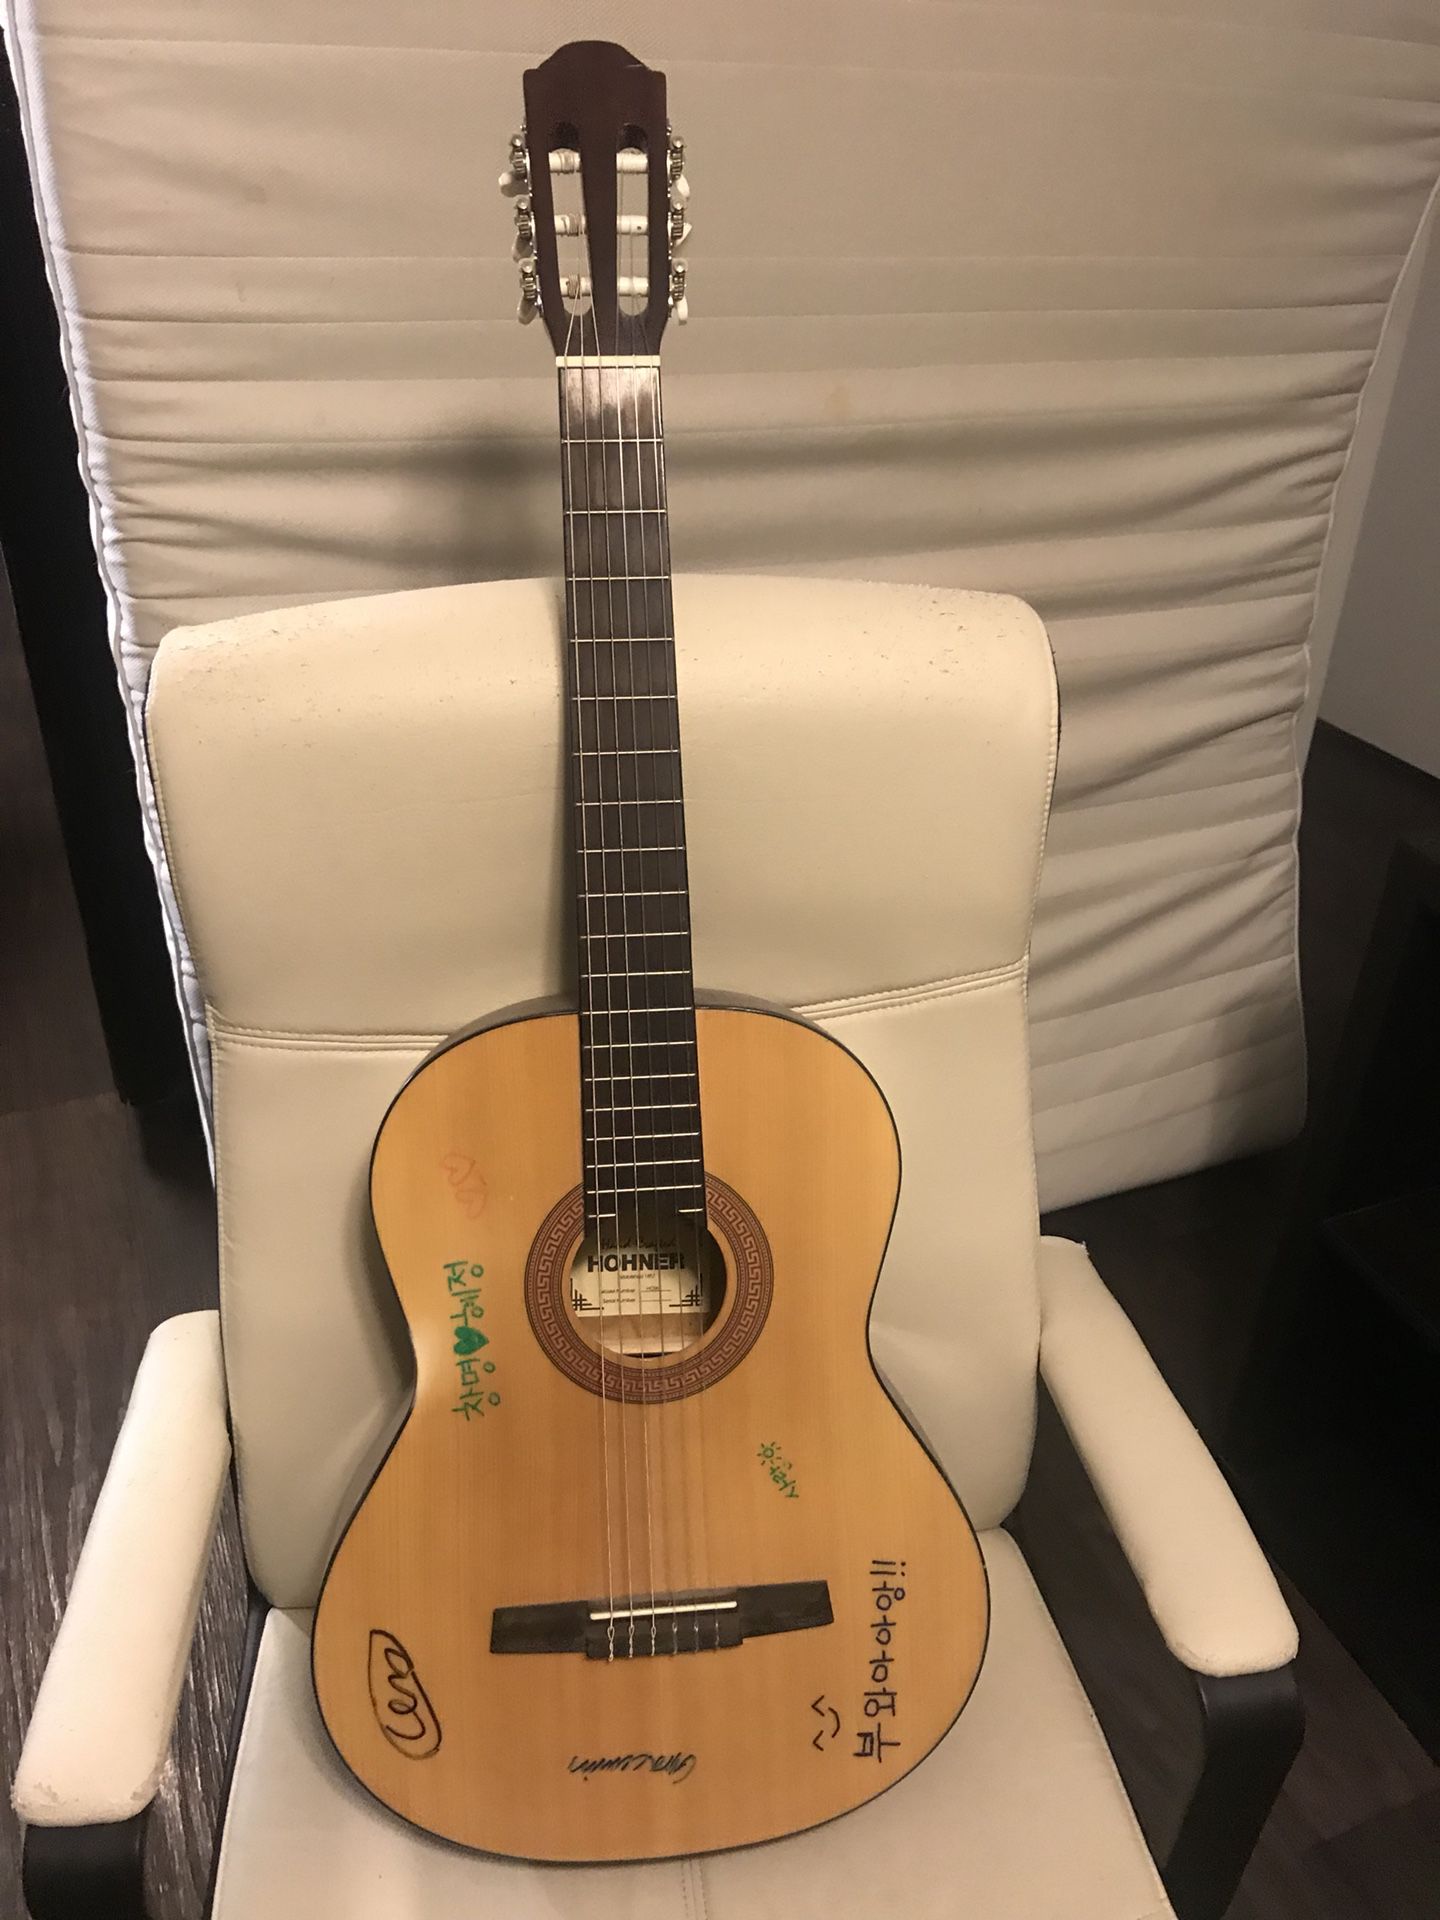 No Brand Classic Guitar ONLY $10